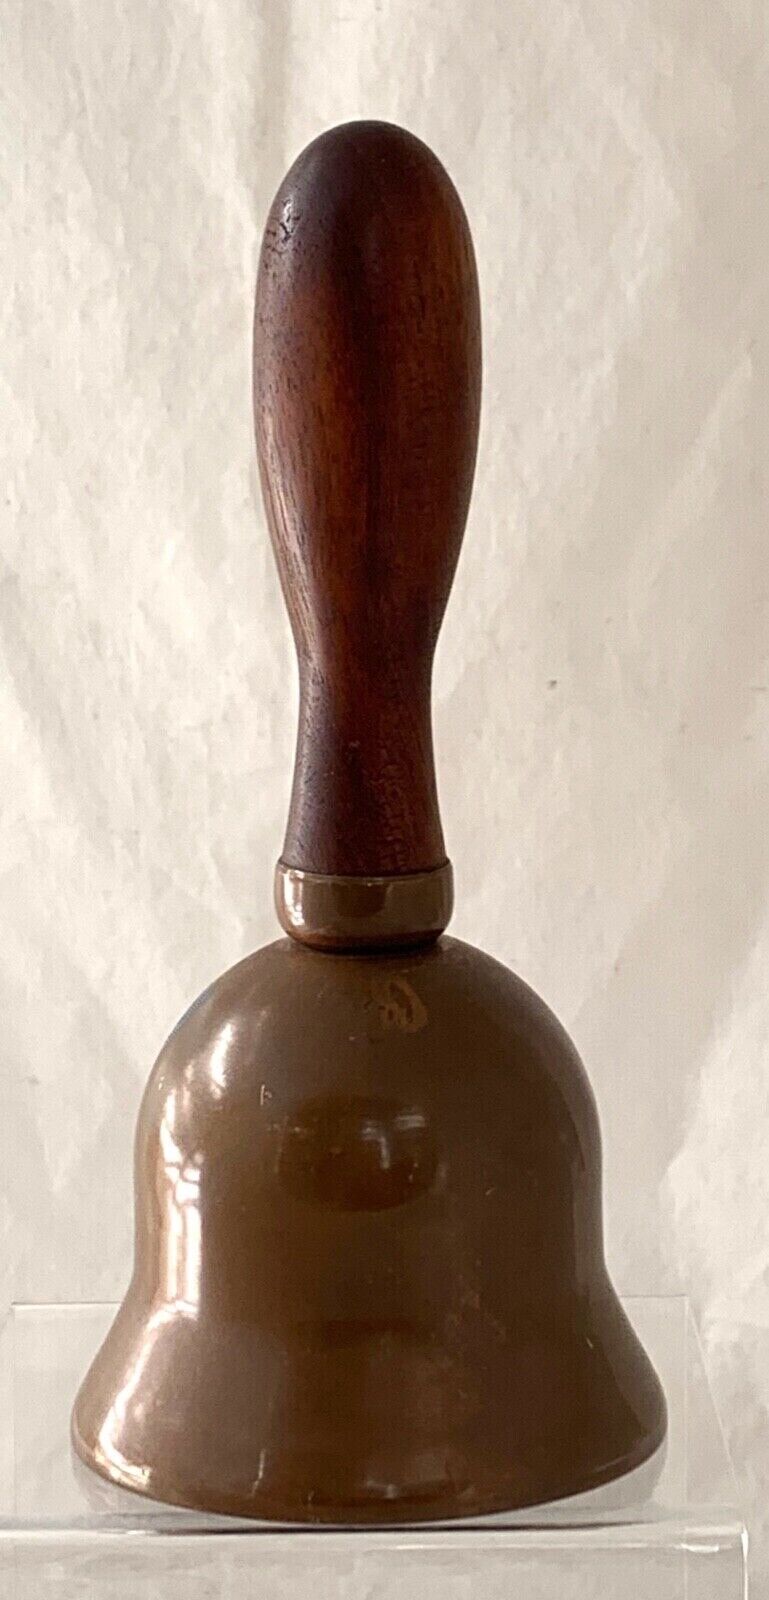 Antique Hand Held School Bell Copper with Wood Handle 7” Tall: Table Bell Ringer